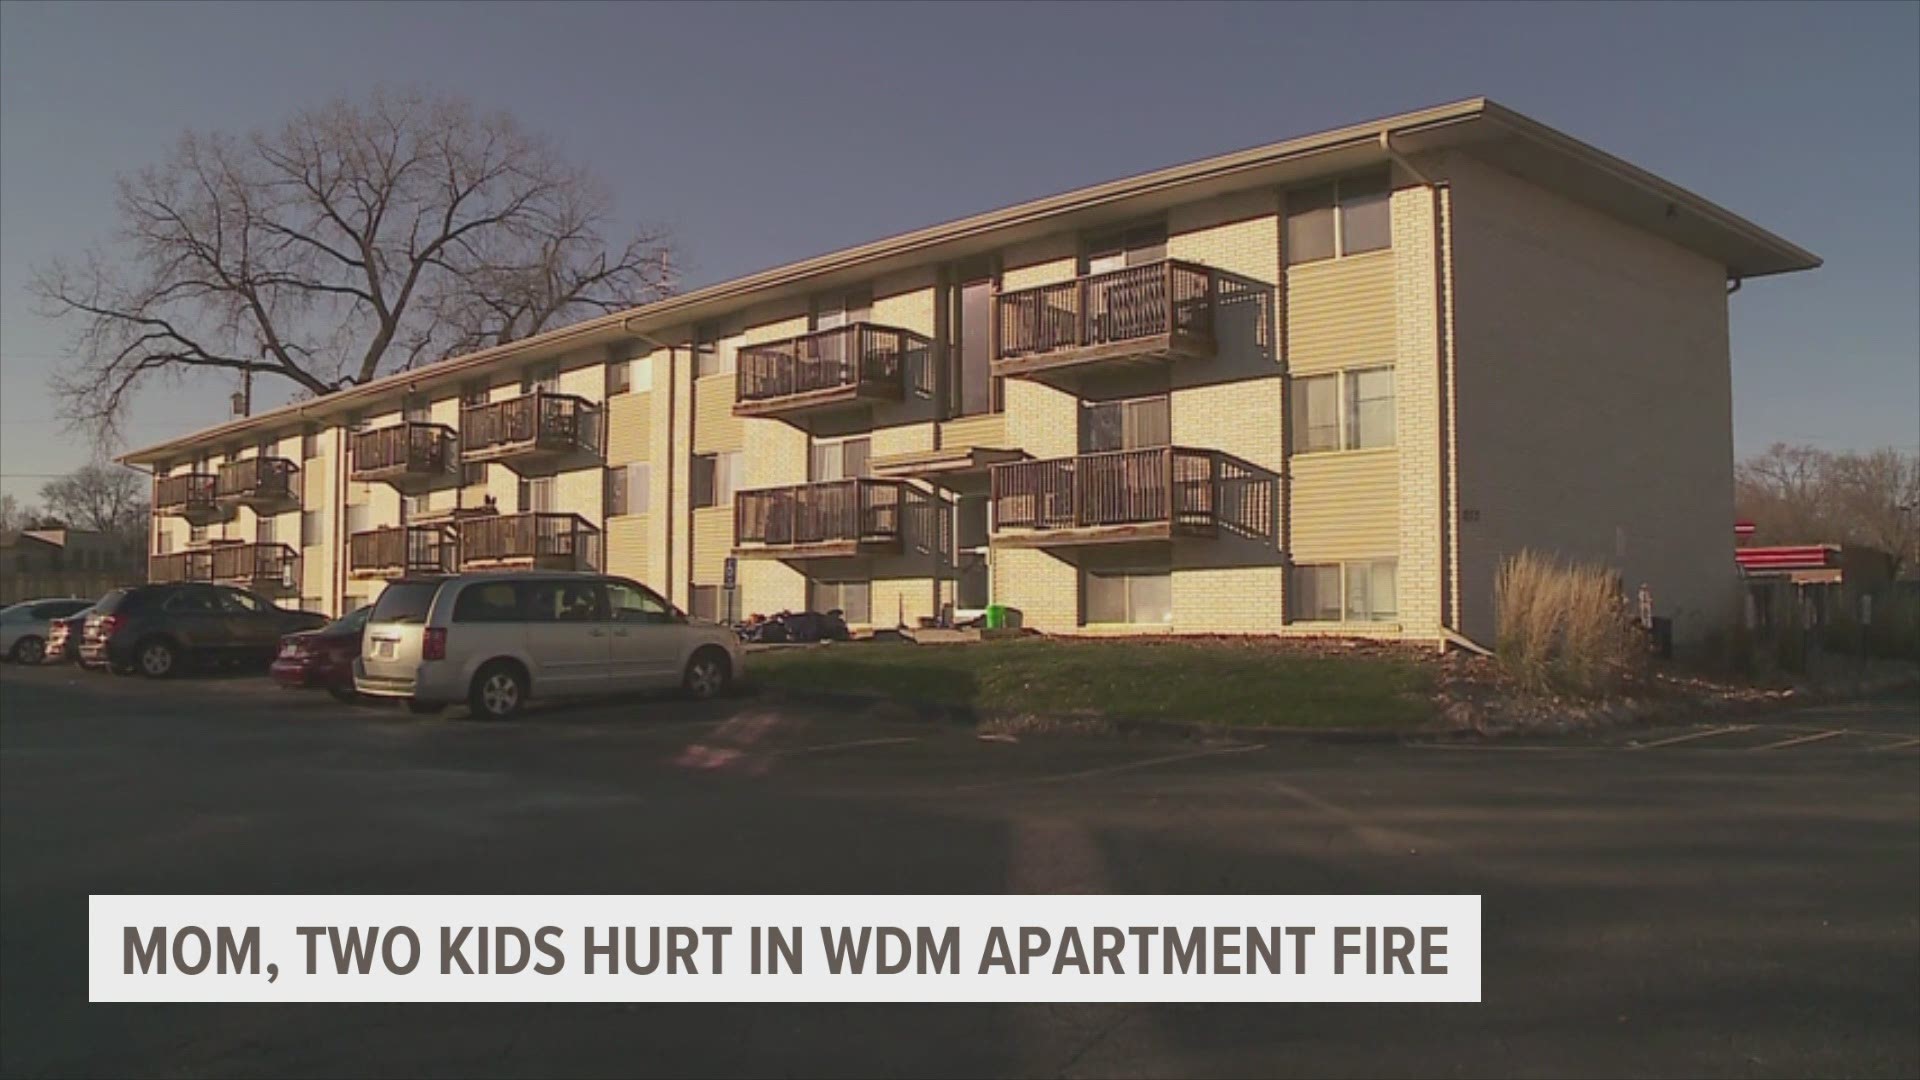 The cause of the fire has yet to be determined, according to a press release from the West Des Moines Fire Department.